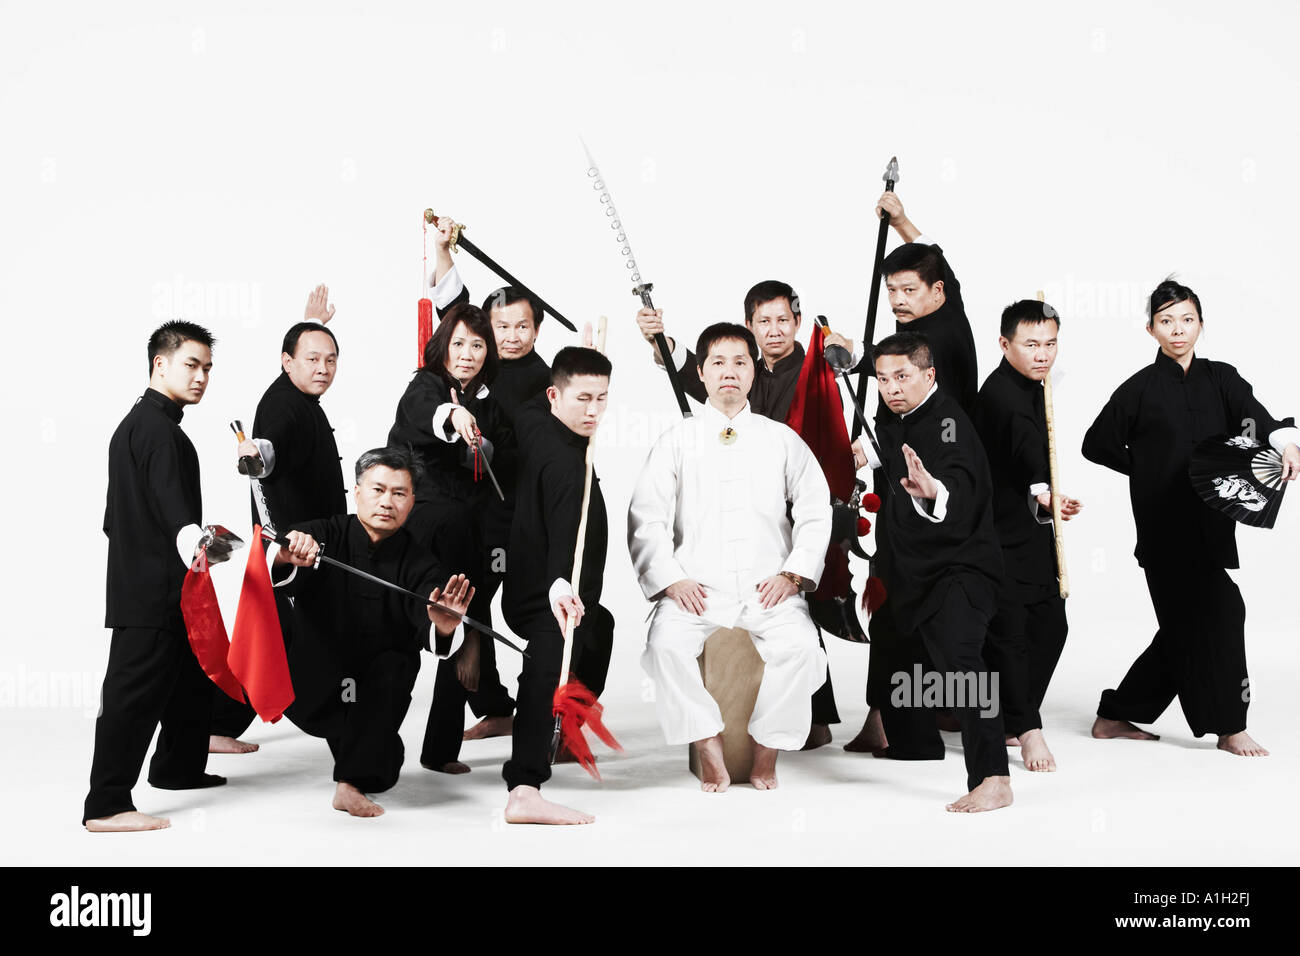 Portrait of a group of people gesturing with weapons Stock Photo